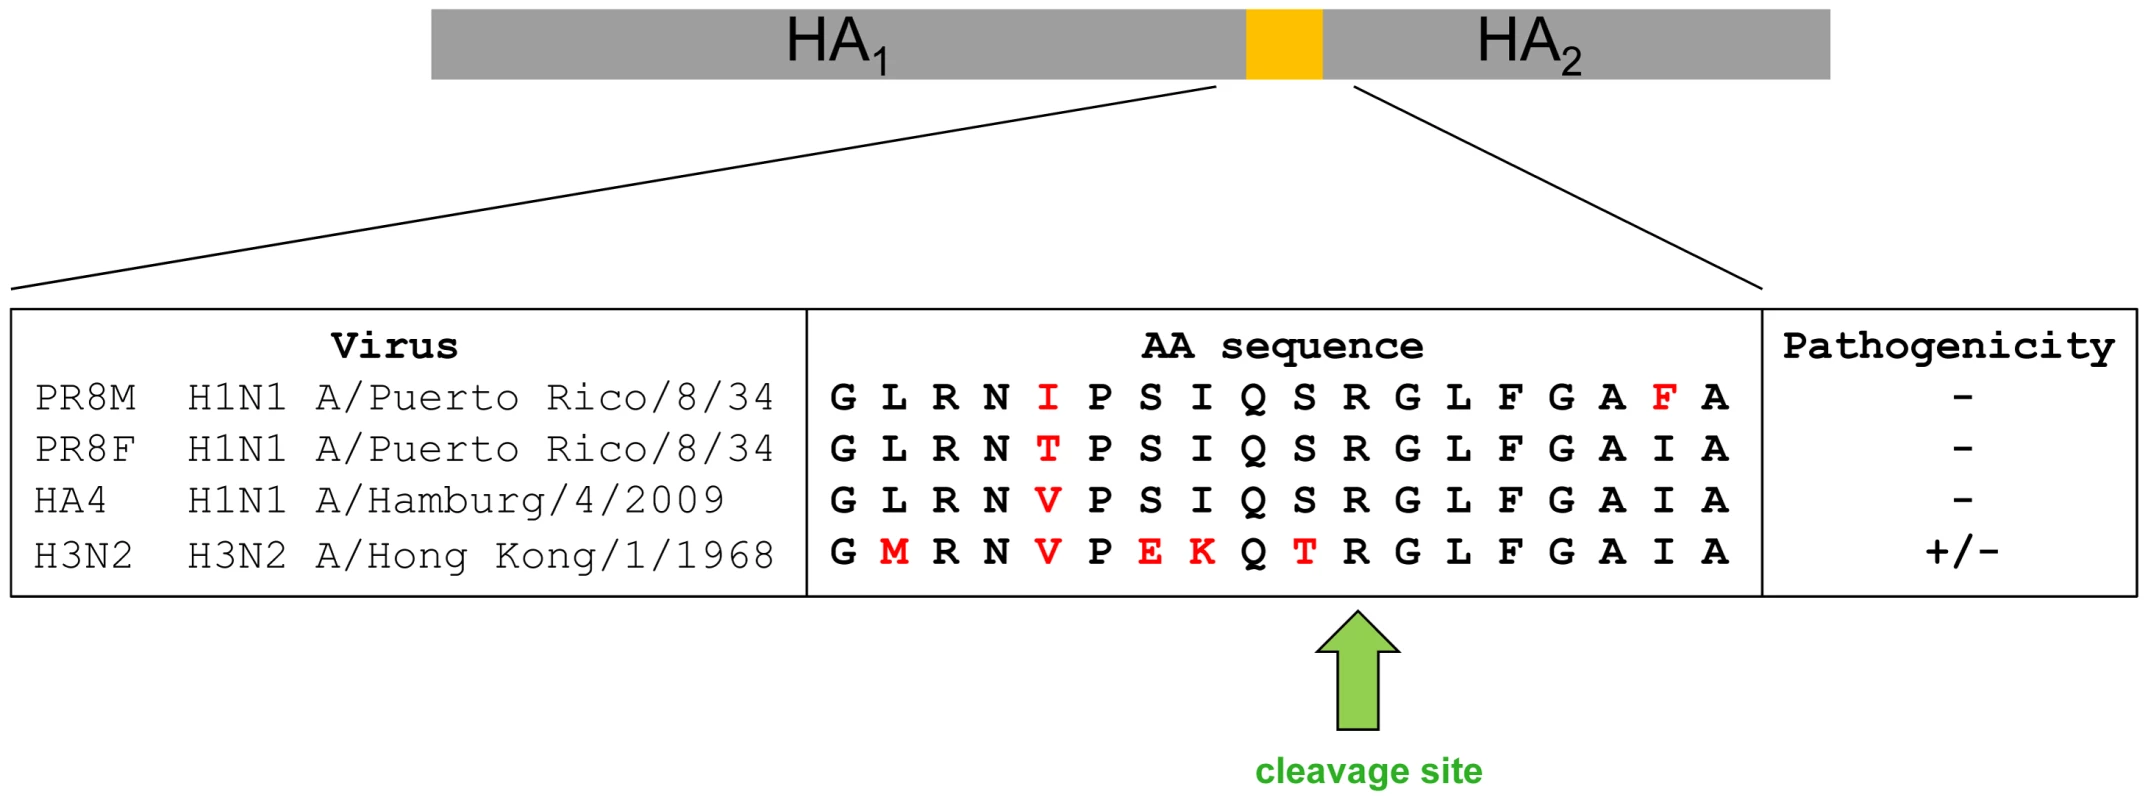 Alignment of amino acid sequences of the protease loop region from H1N1 and H3N2 influenza A viruses.